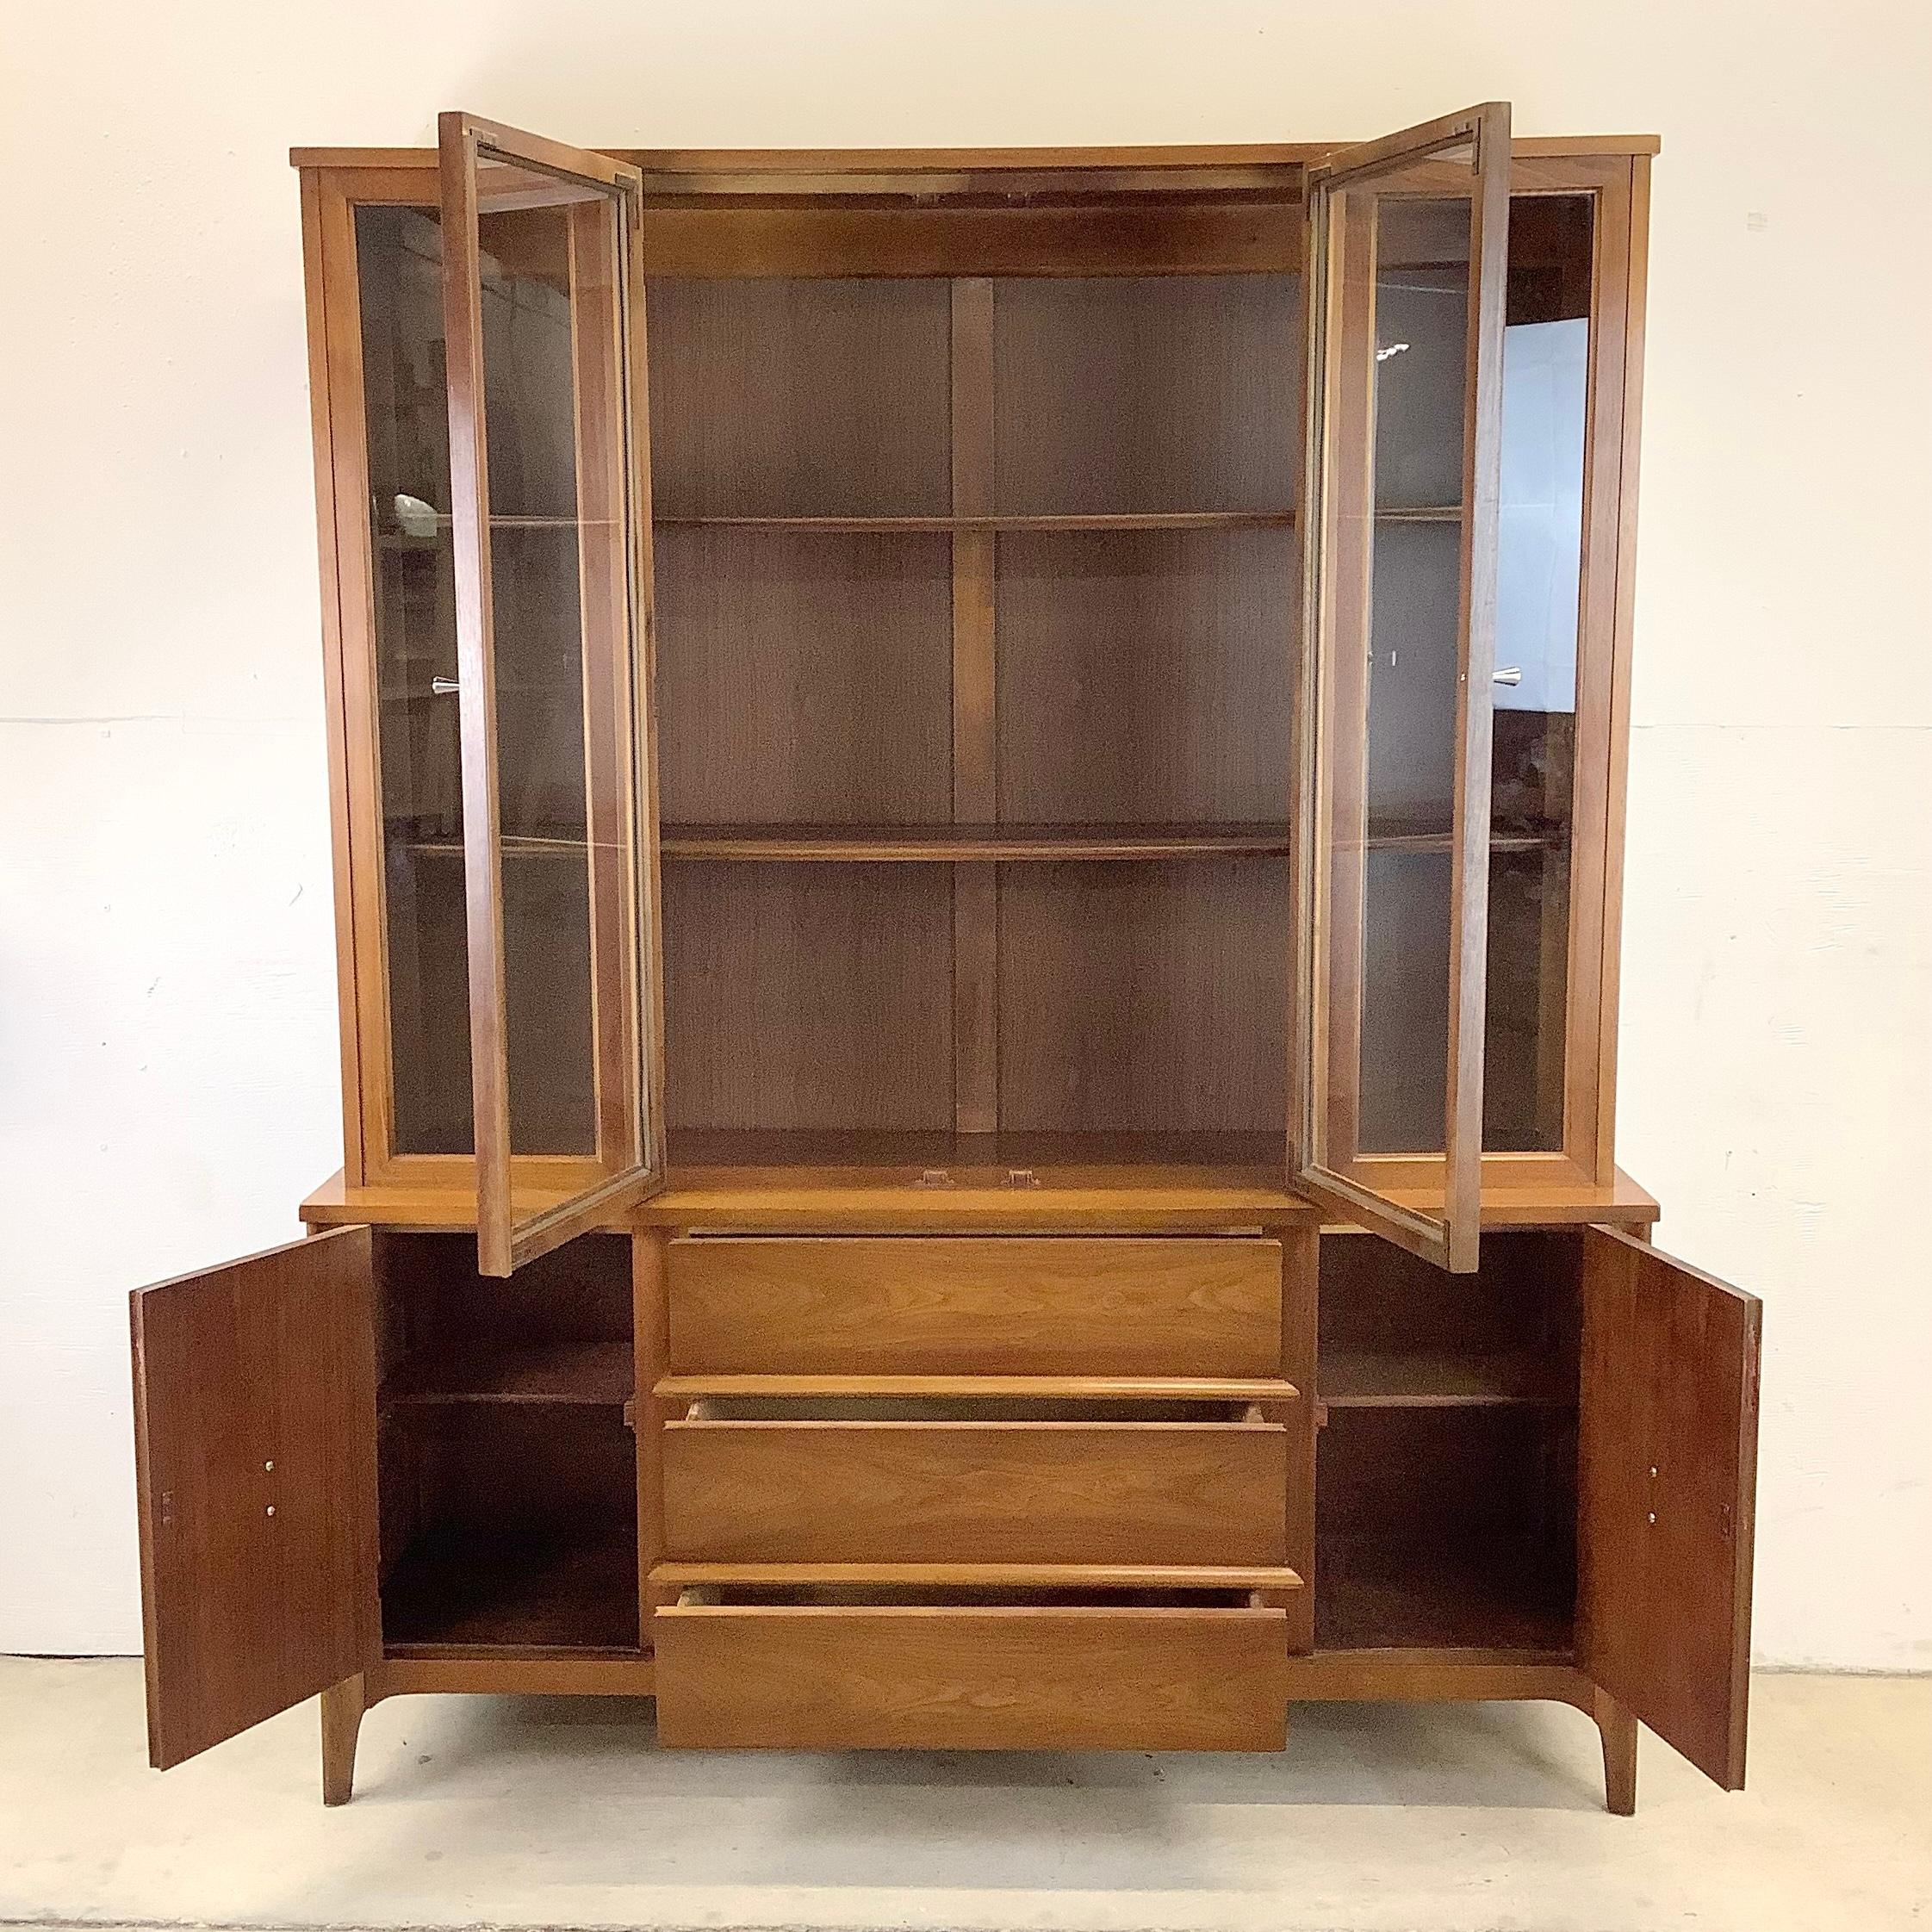 This beautiful mid-century sideboard with china cabinet hutch top features exquisite mix of walnut finish and subtle modern design. This single piece sideboard combines china cabinet top with lower mix of drawers and cabinet space, offering the